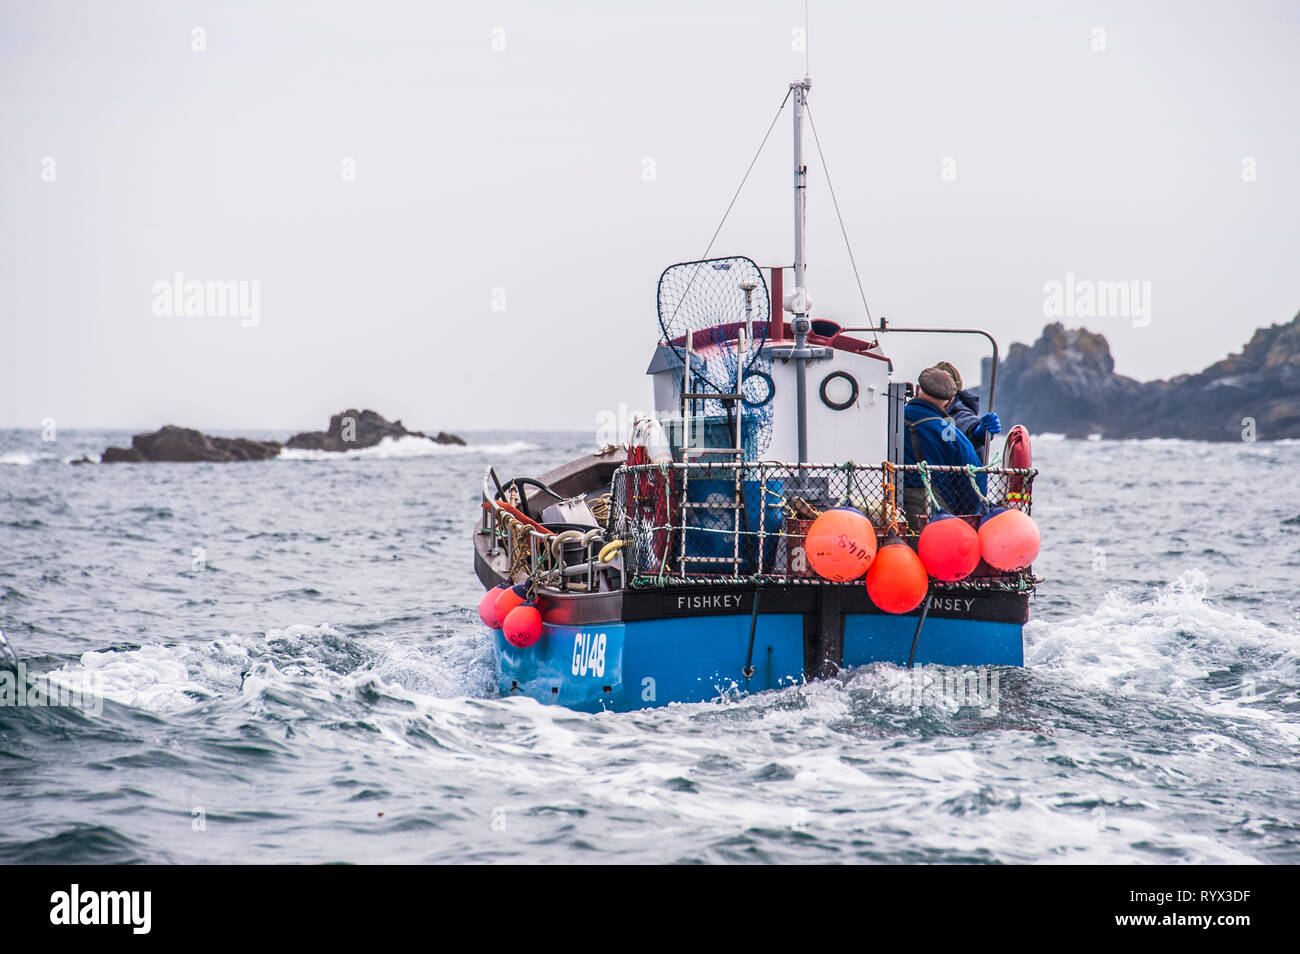 Fishing boat Fishkey leaving Sark for a day's work photographed from another boat Stock Photo